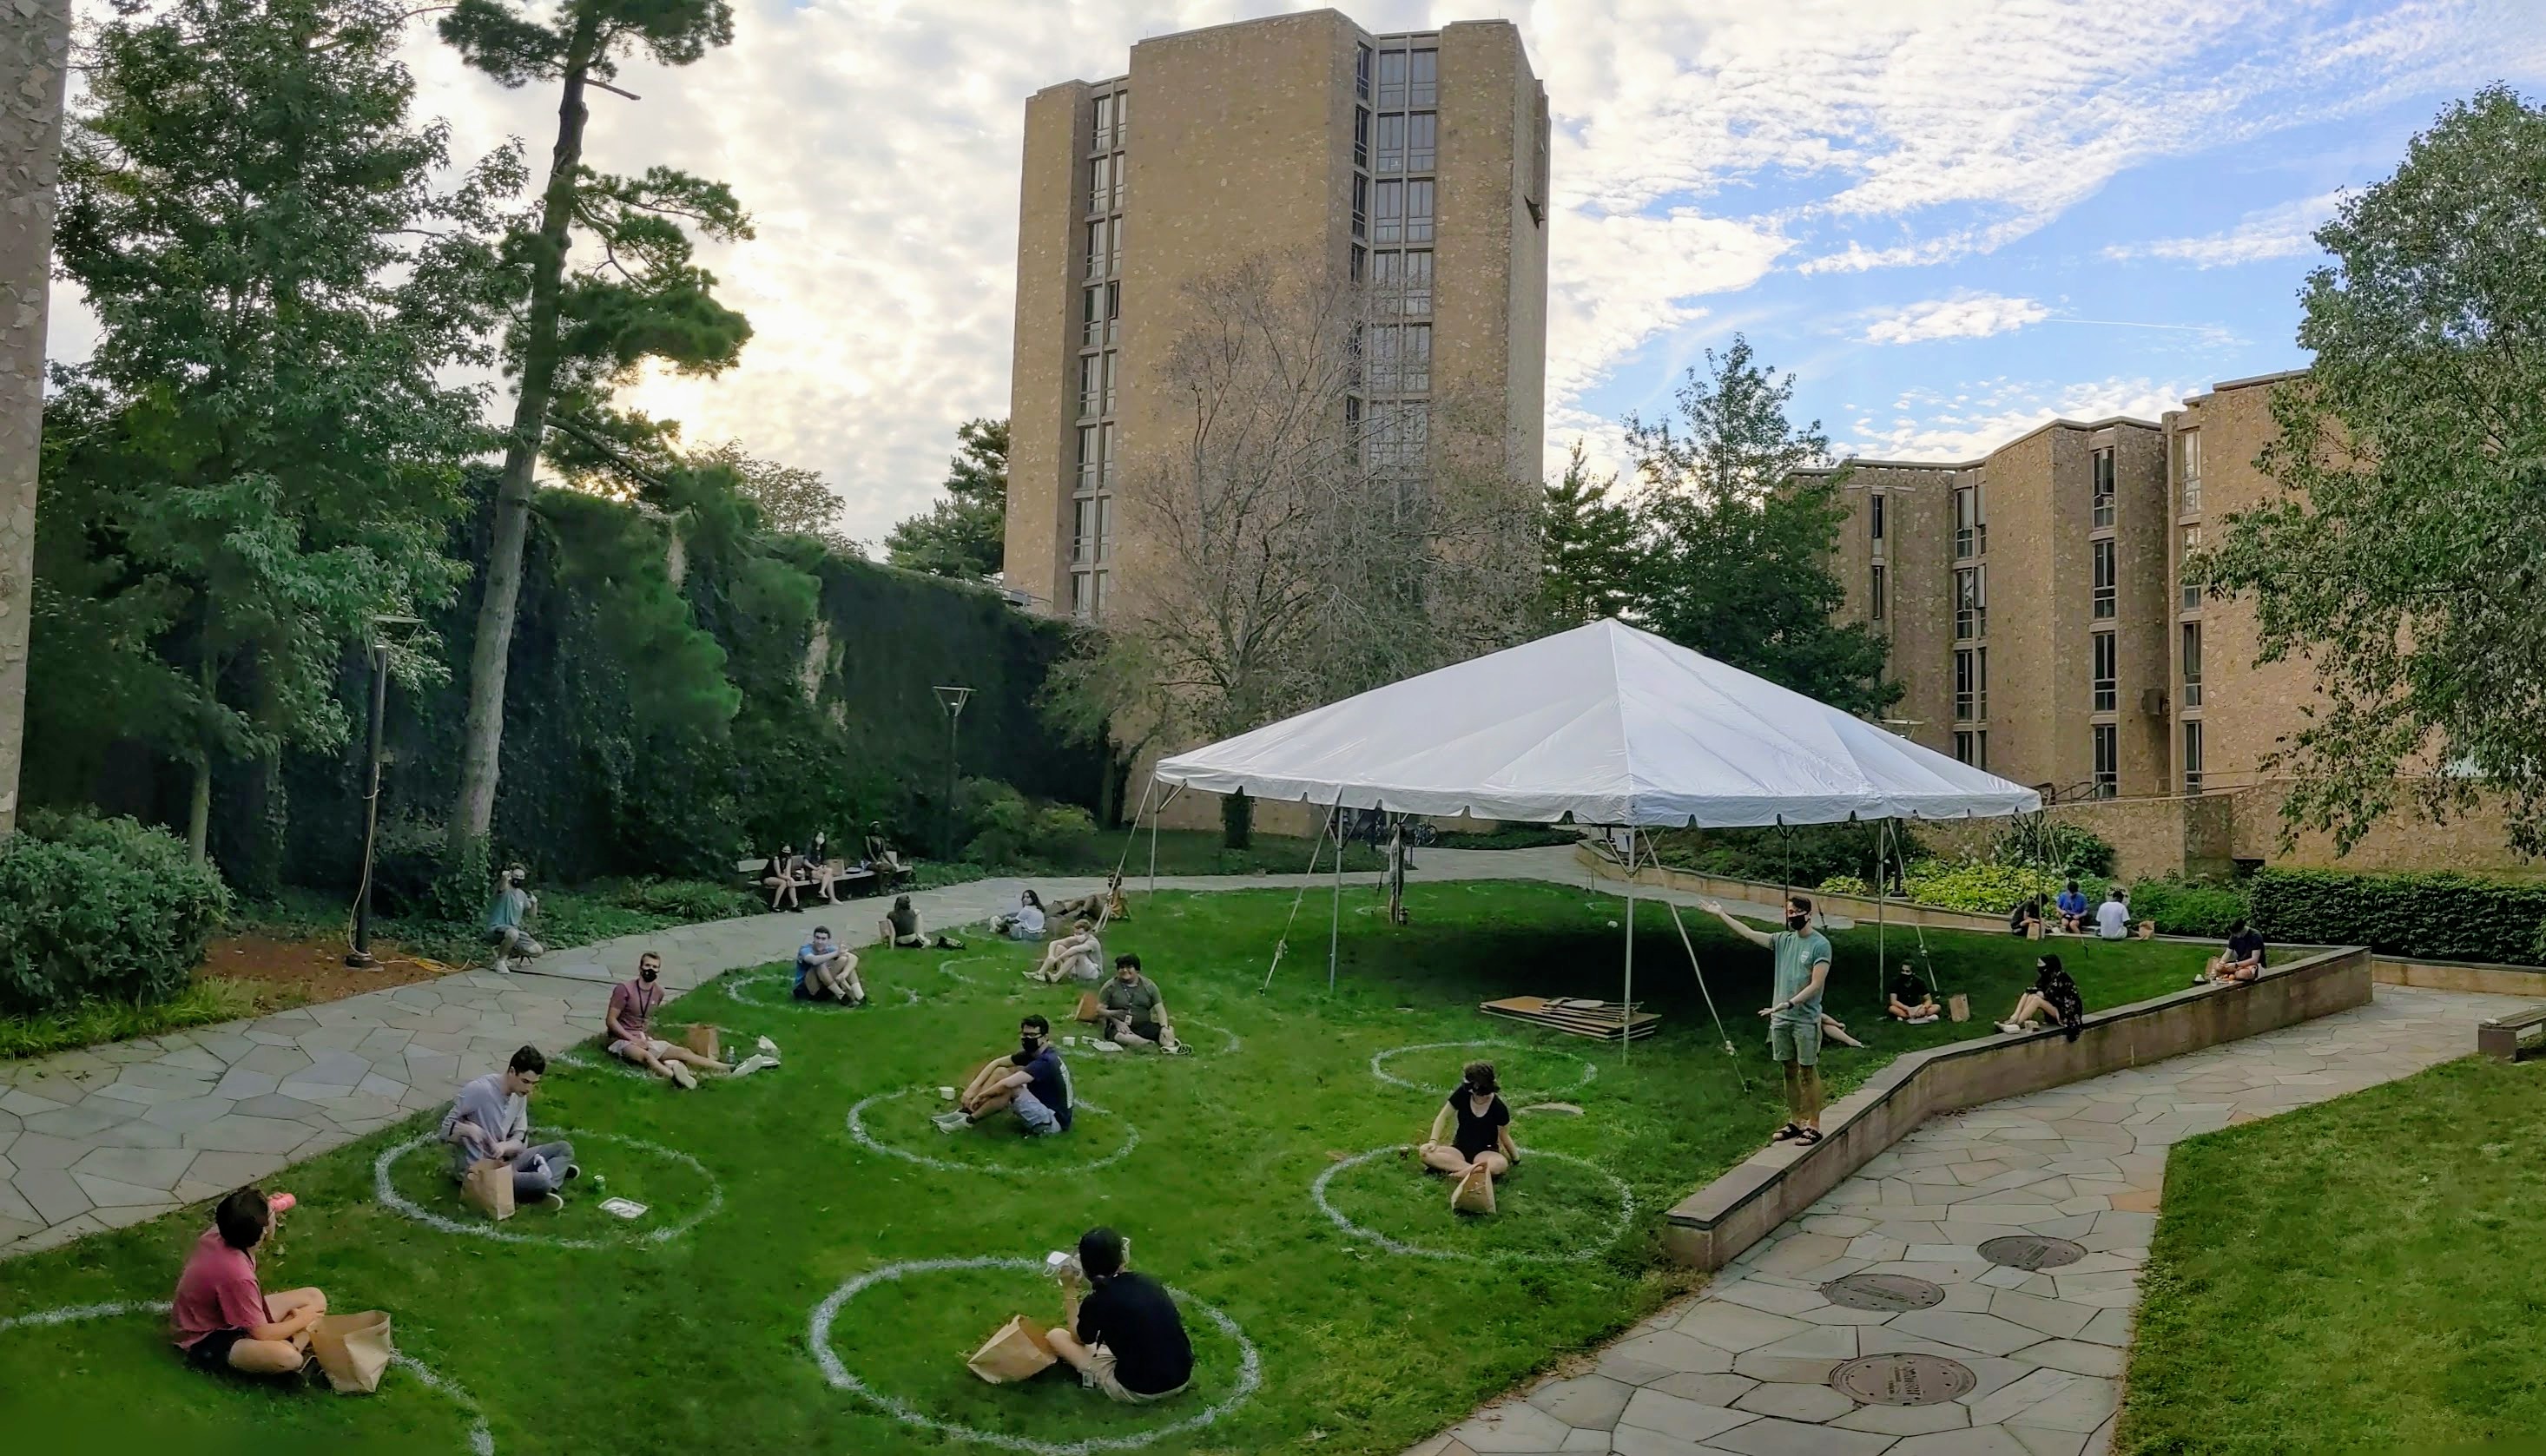 At the beginning of the Fall semester, students sit in spray-painted social-distancing circles in the Stiles Courtyard. In the background, the Stiles Tower is entirely void of students for the term. Captured 8/24/2020.